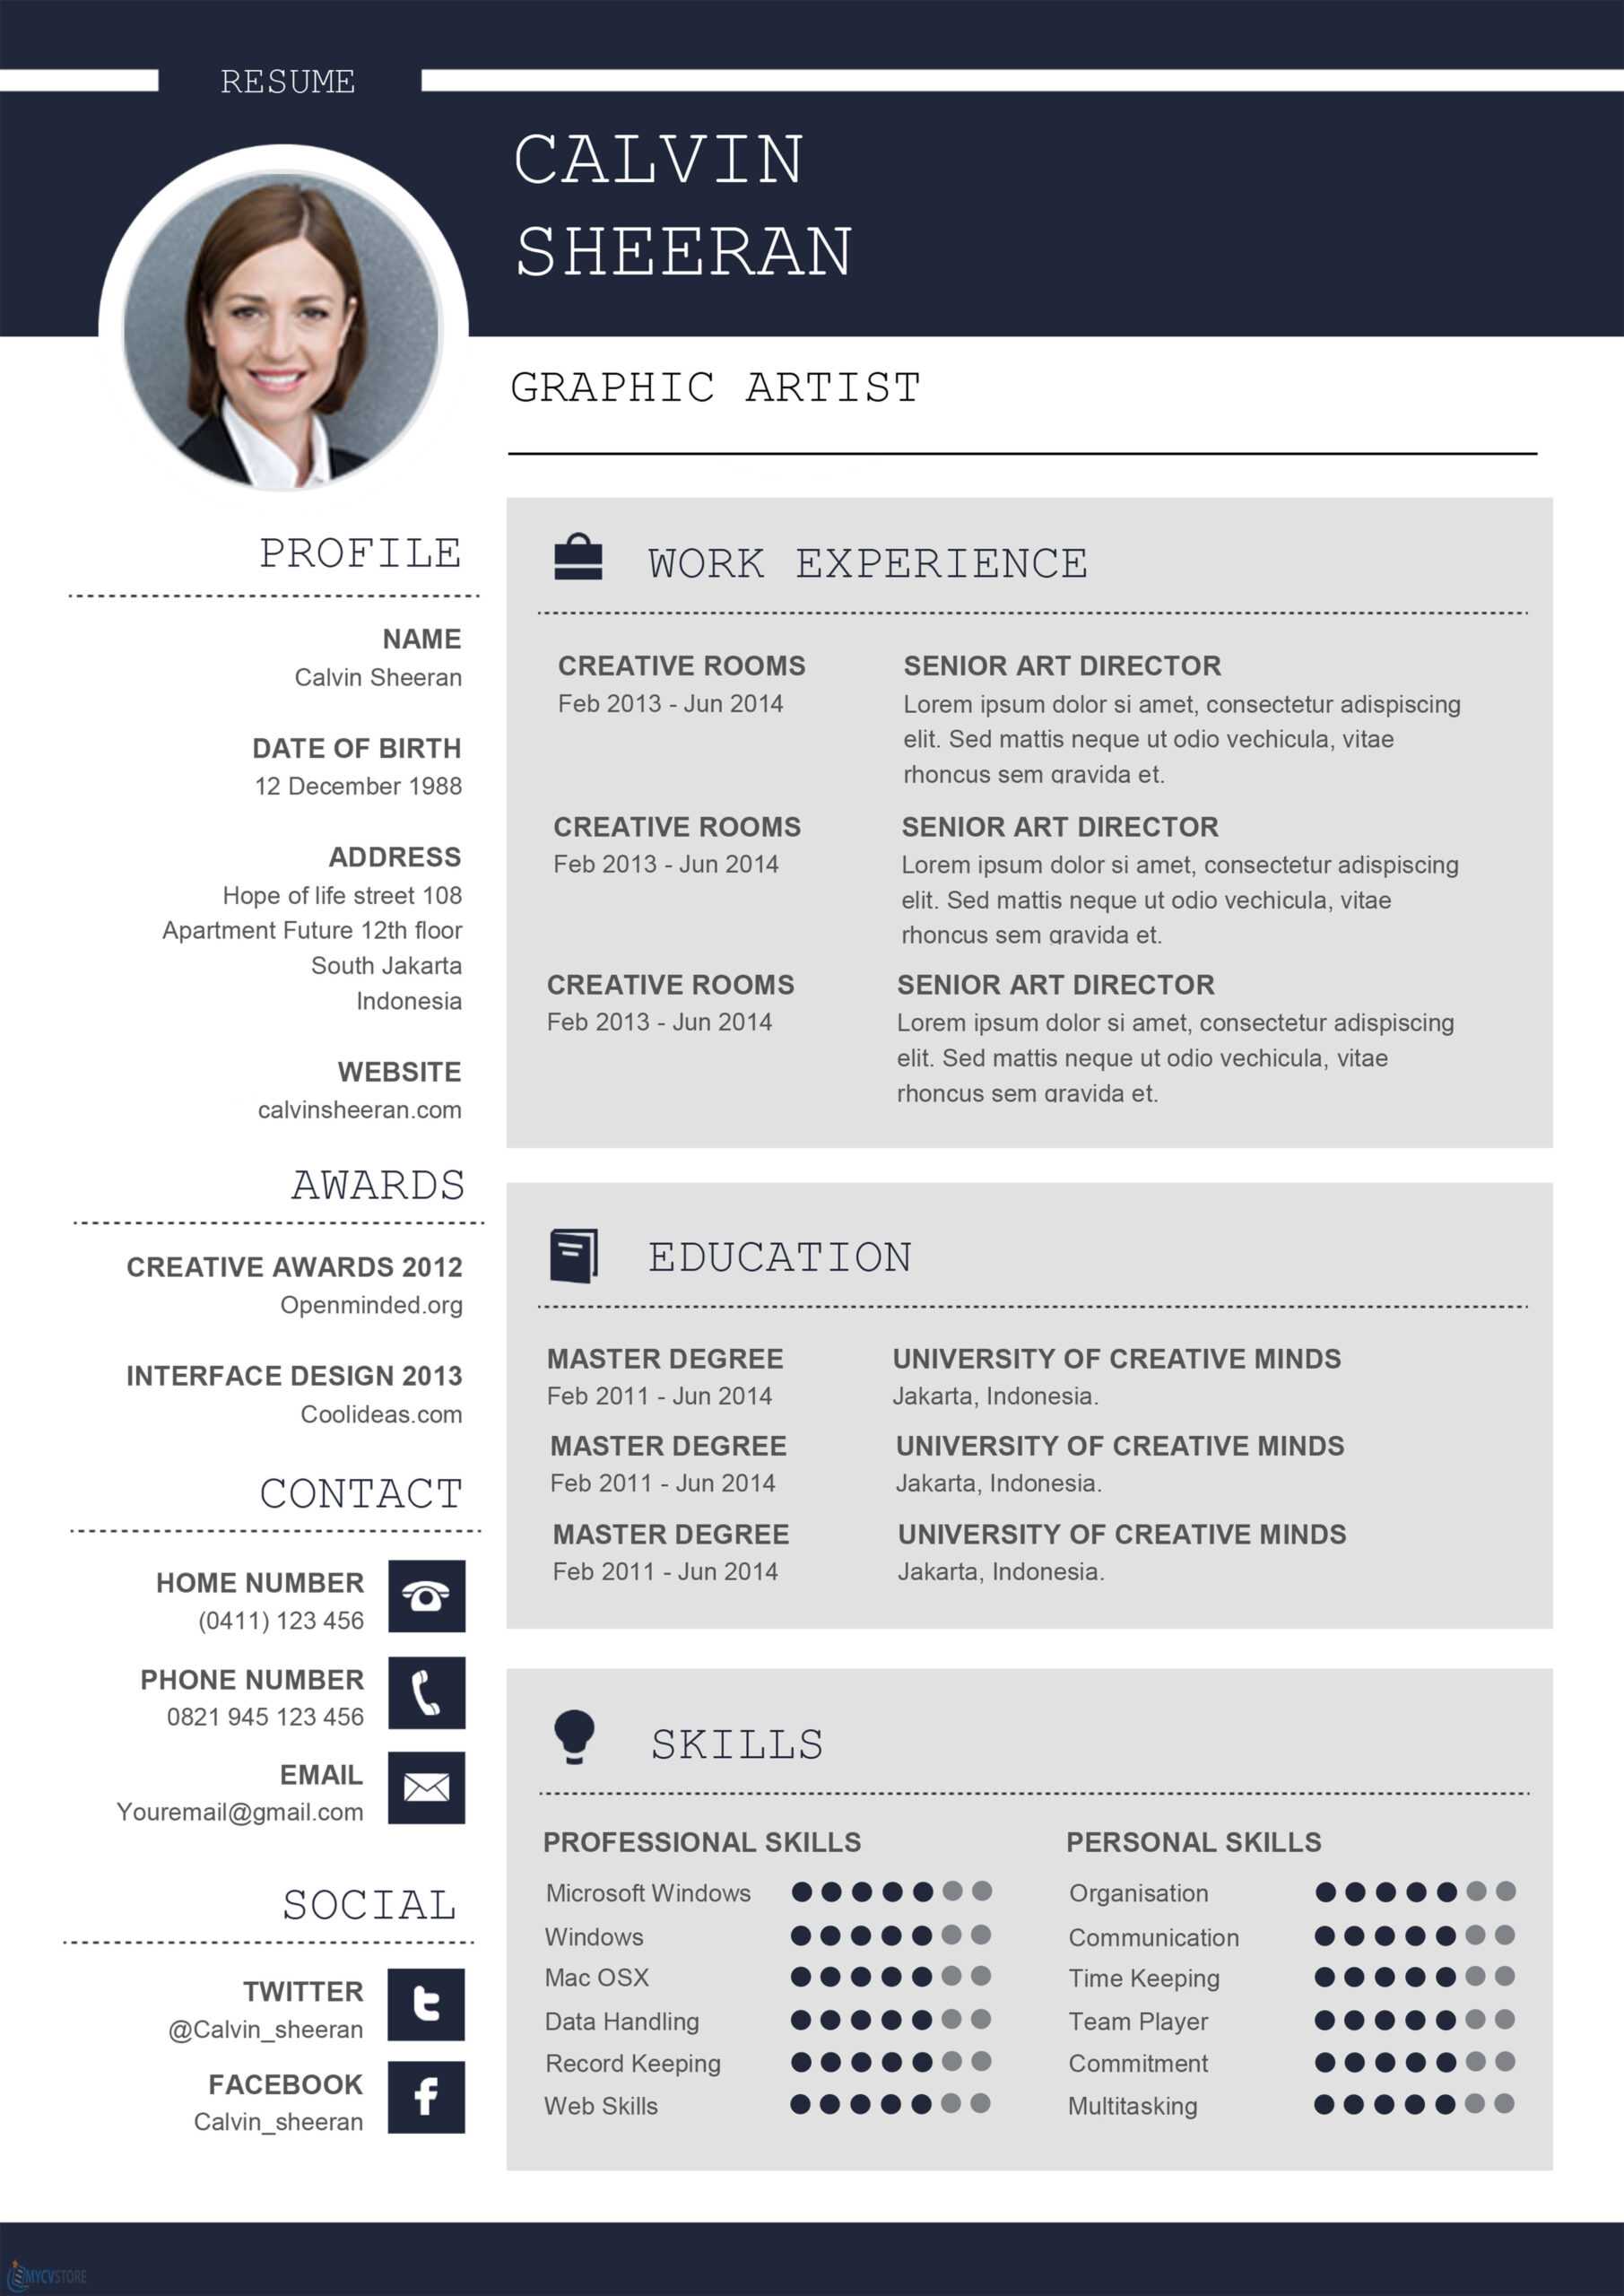 Resume ~ Professional Resume Template Samples Free Word With Resume Templates Word 2013